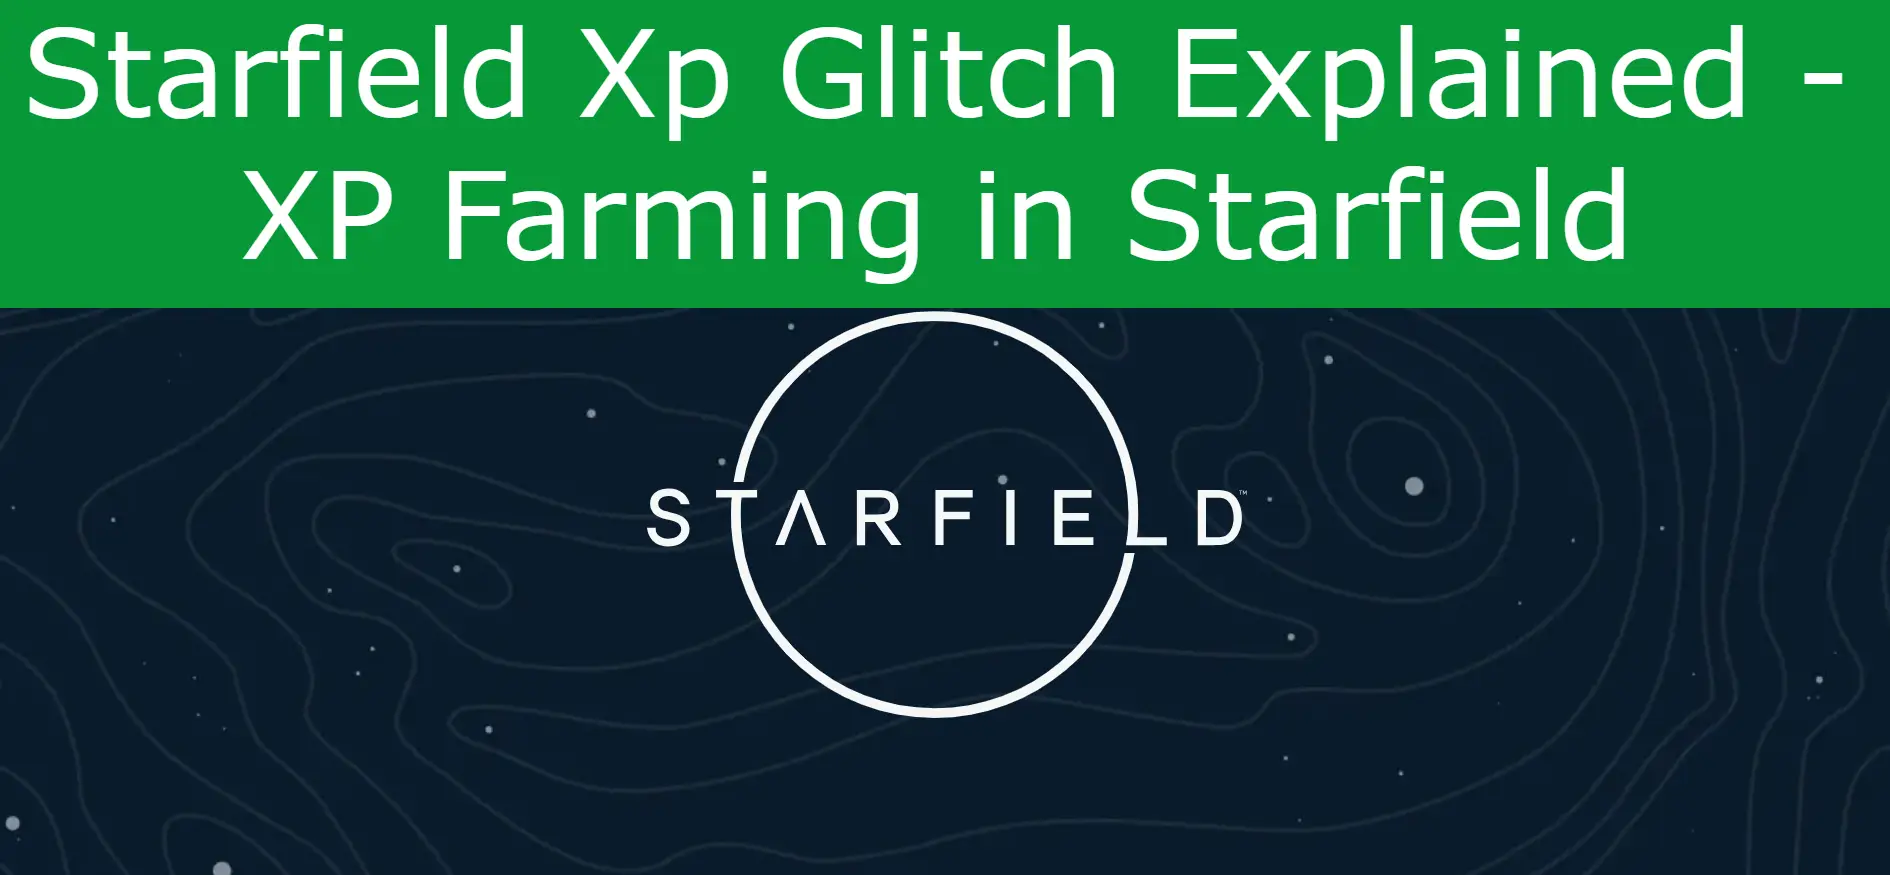 You are currently viewing Starfield Xp Glitch Explained – XP Farming in Starfield